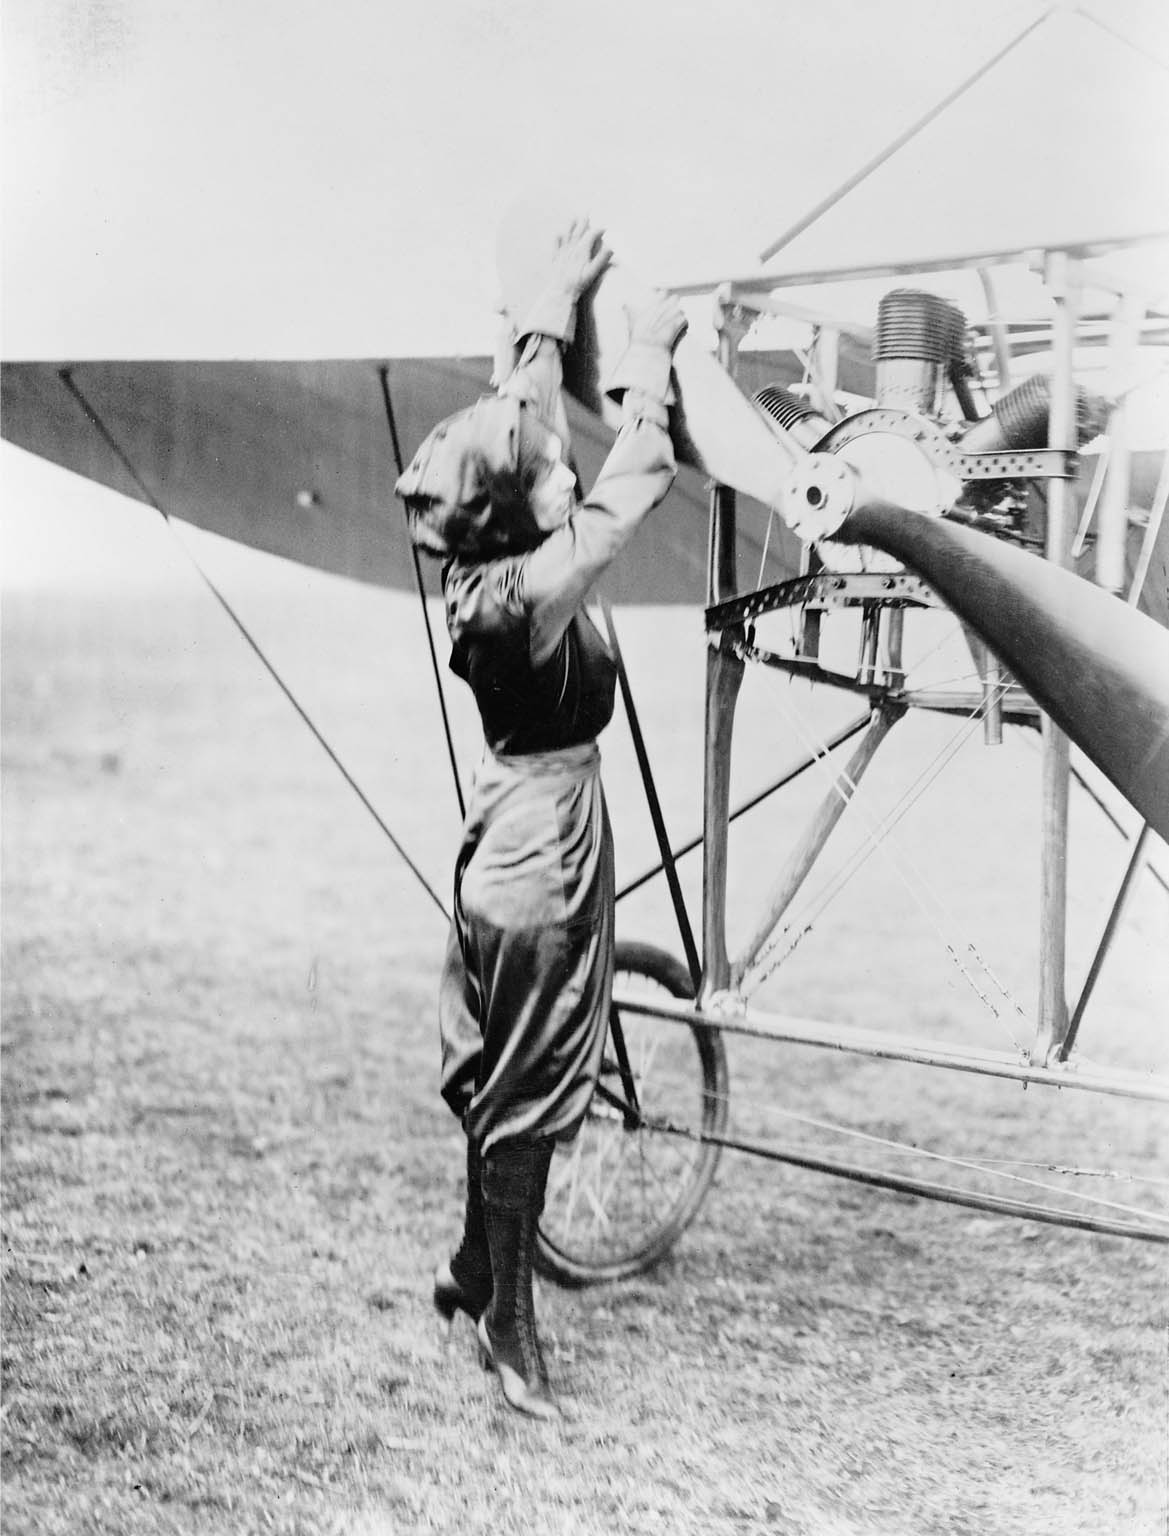 Harriet Quimby, wearing her purple satin flying suit, pulls the Chauvière Intégrale propeller of the Blériot XI to start the air-cooled Anzani 72° W3 ("fan" or "semi-radial") 3-cylinder engine.